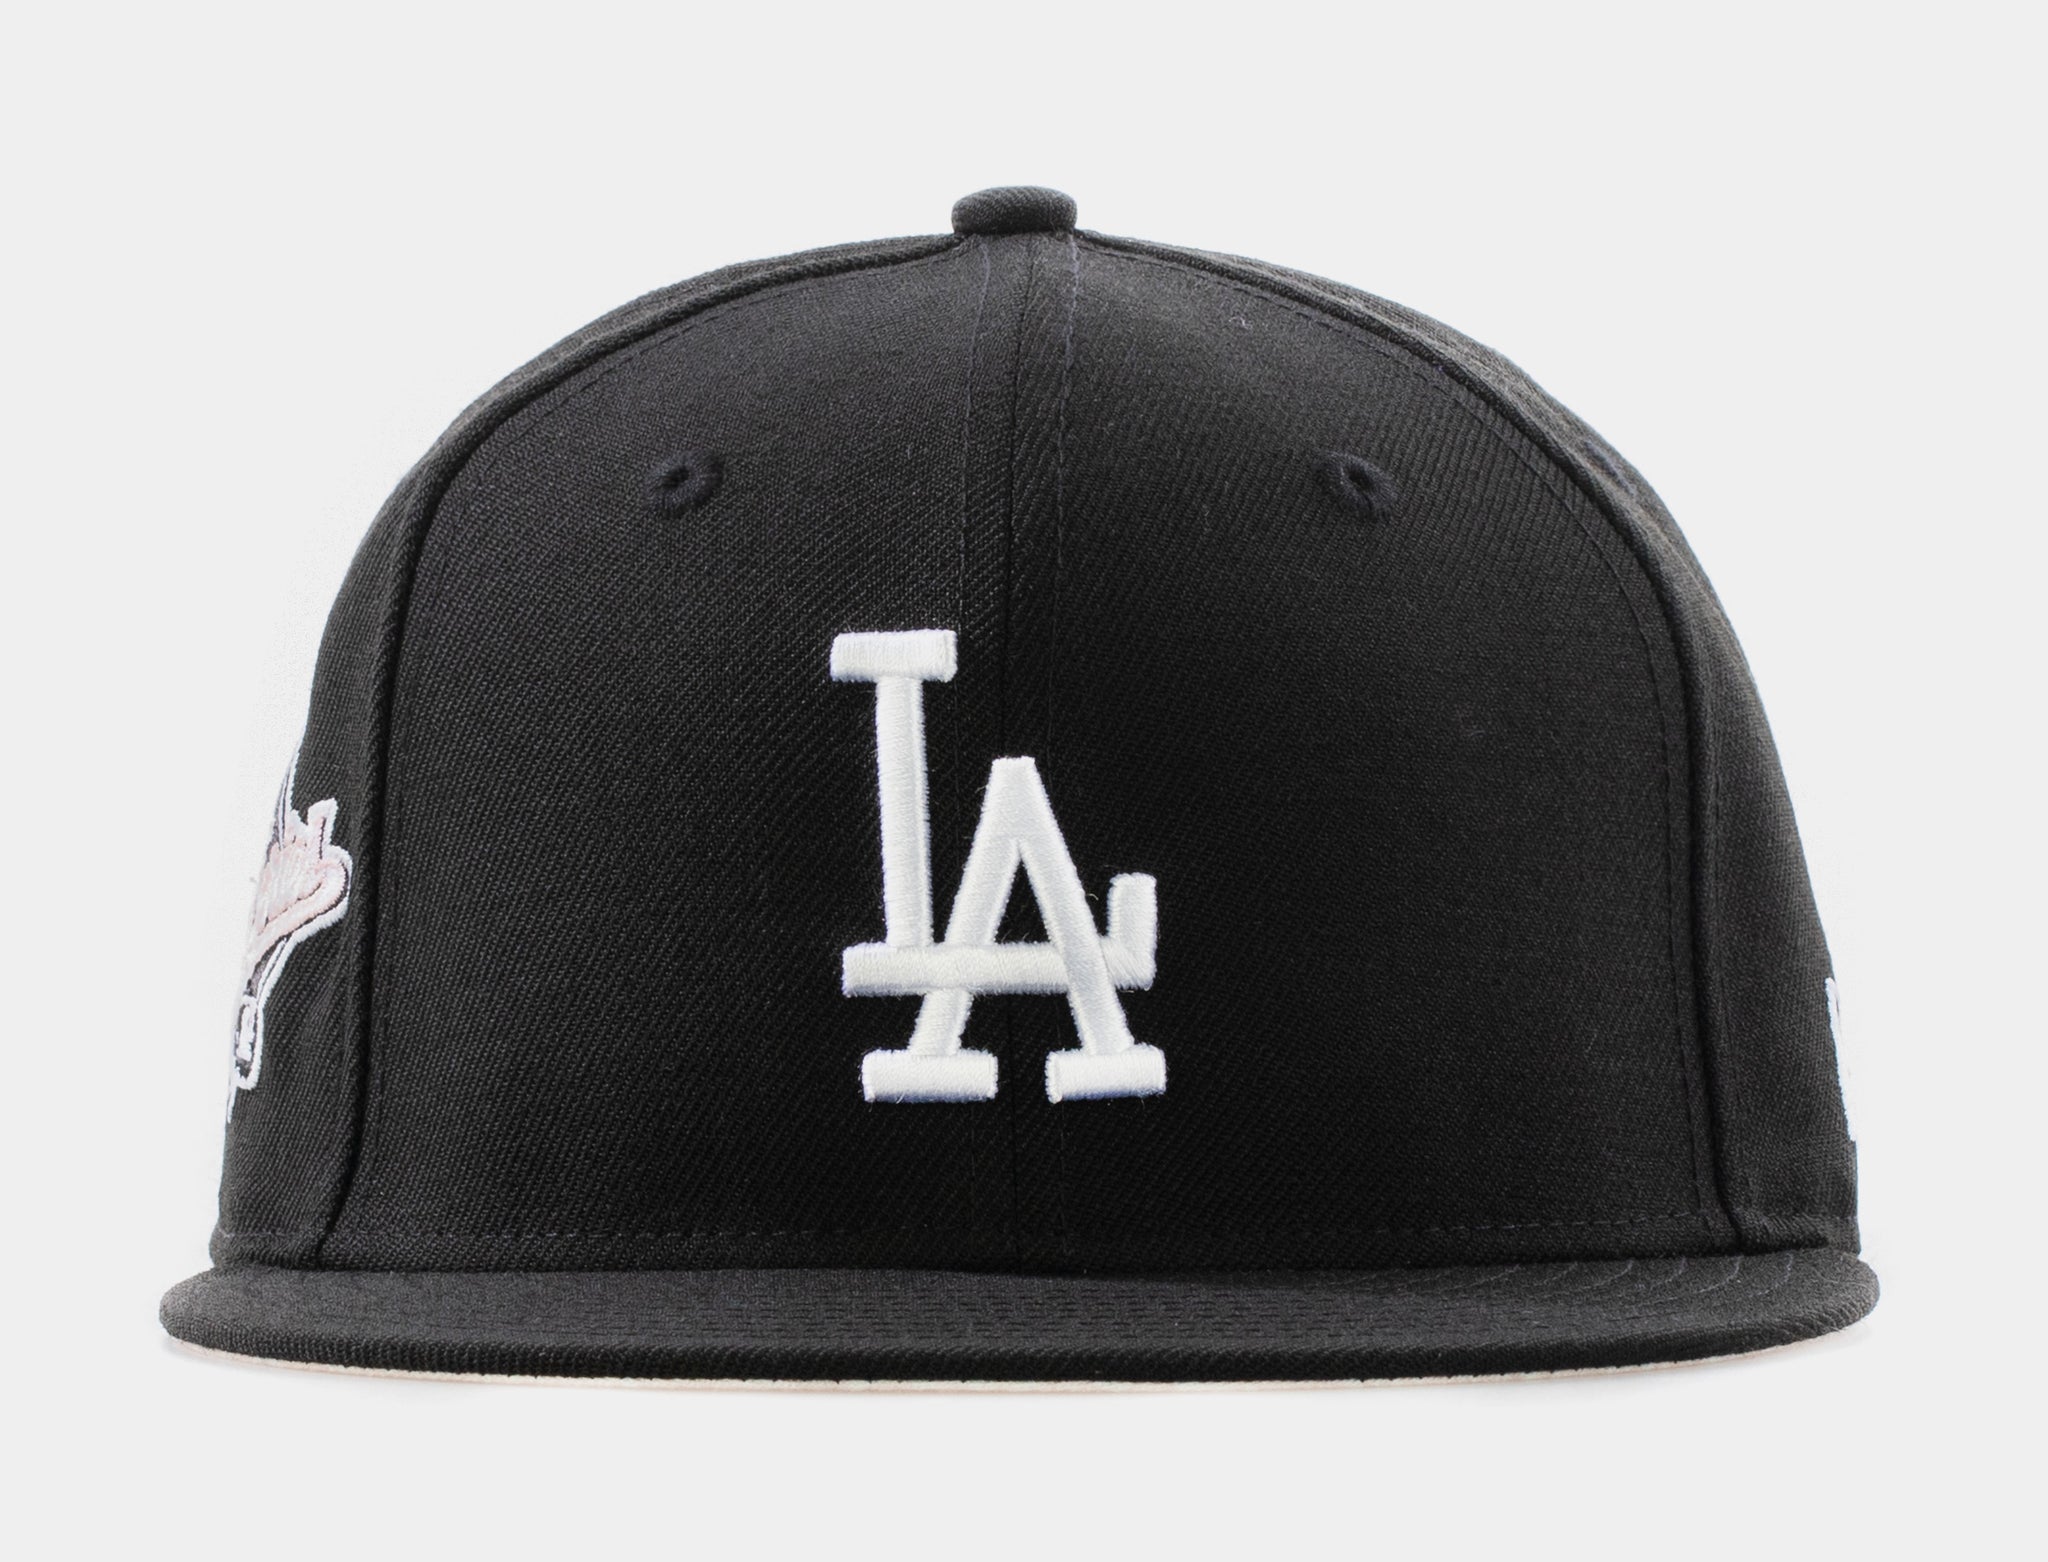 New Era MLB Black Allover Team Logo 59FIFTY Fitted Hat